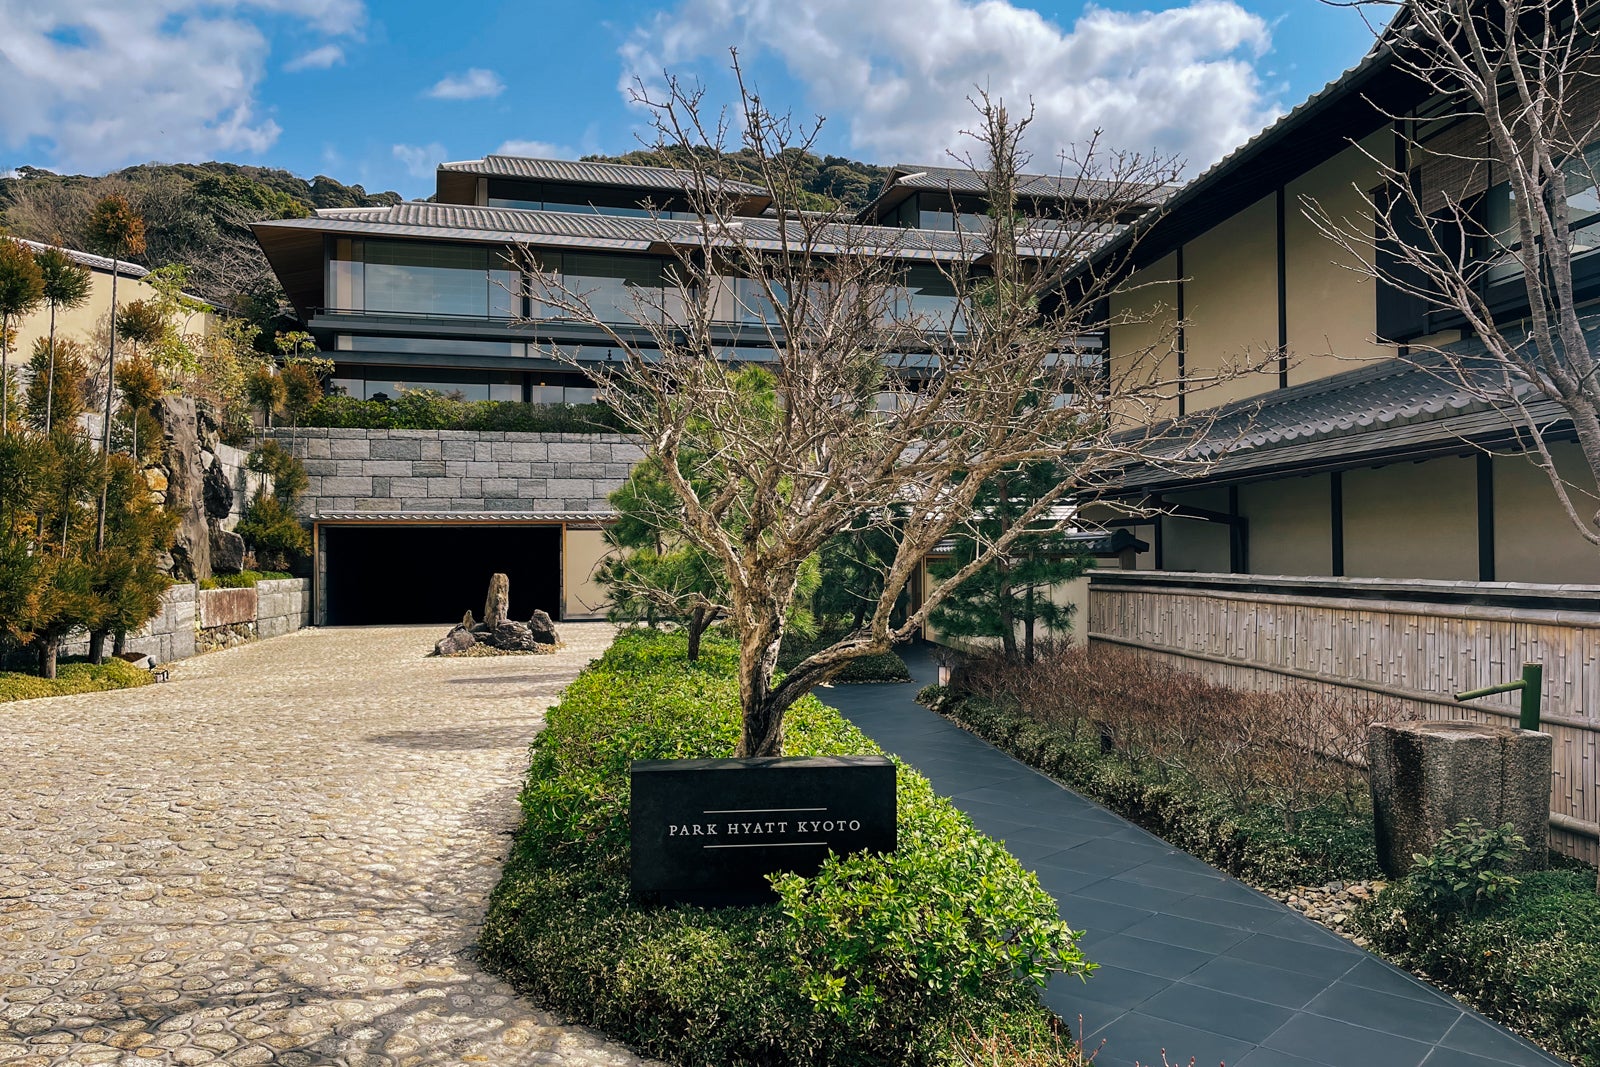 Park Hyatt Kyoto: A Blend of Tradition and Luxury